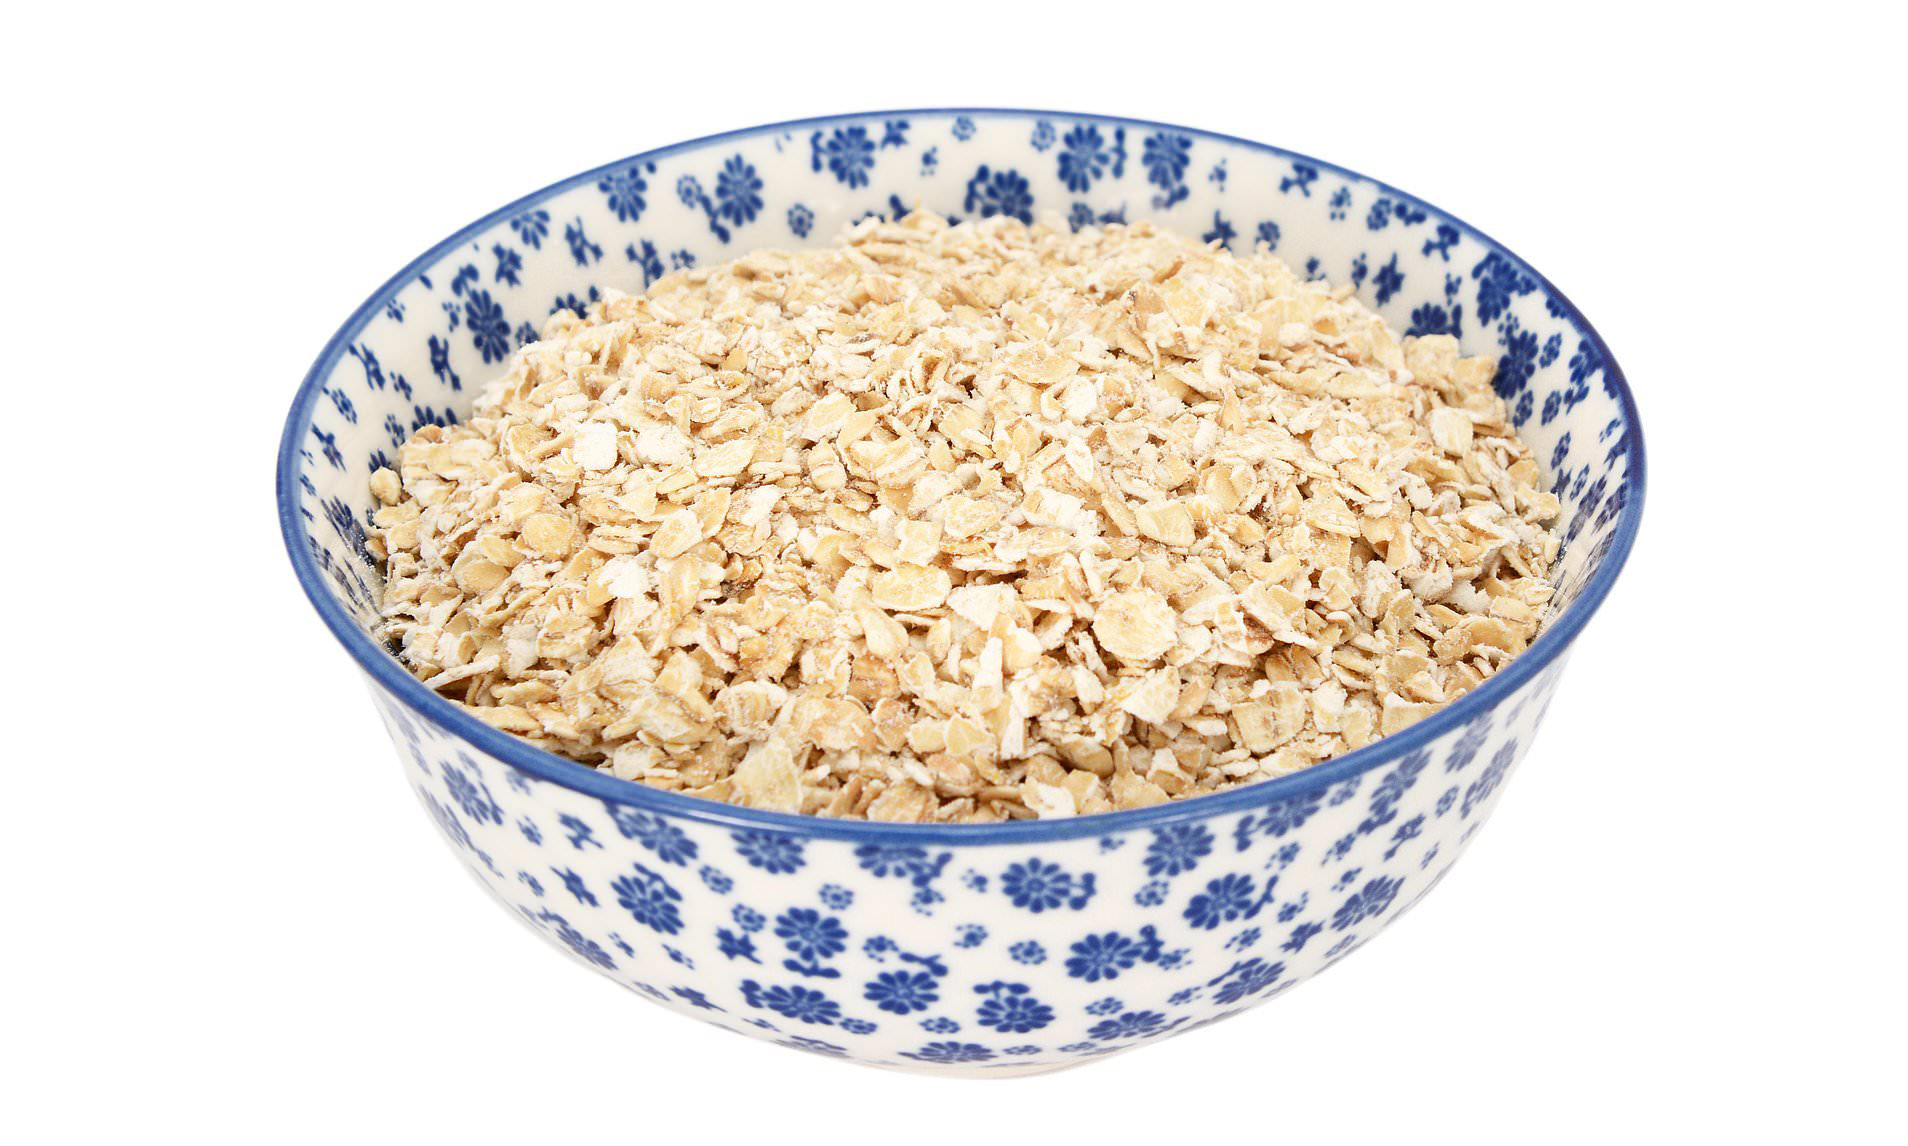 Why men aren't getting their (breakfast) oats! Study shows how men and ...